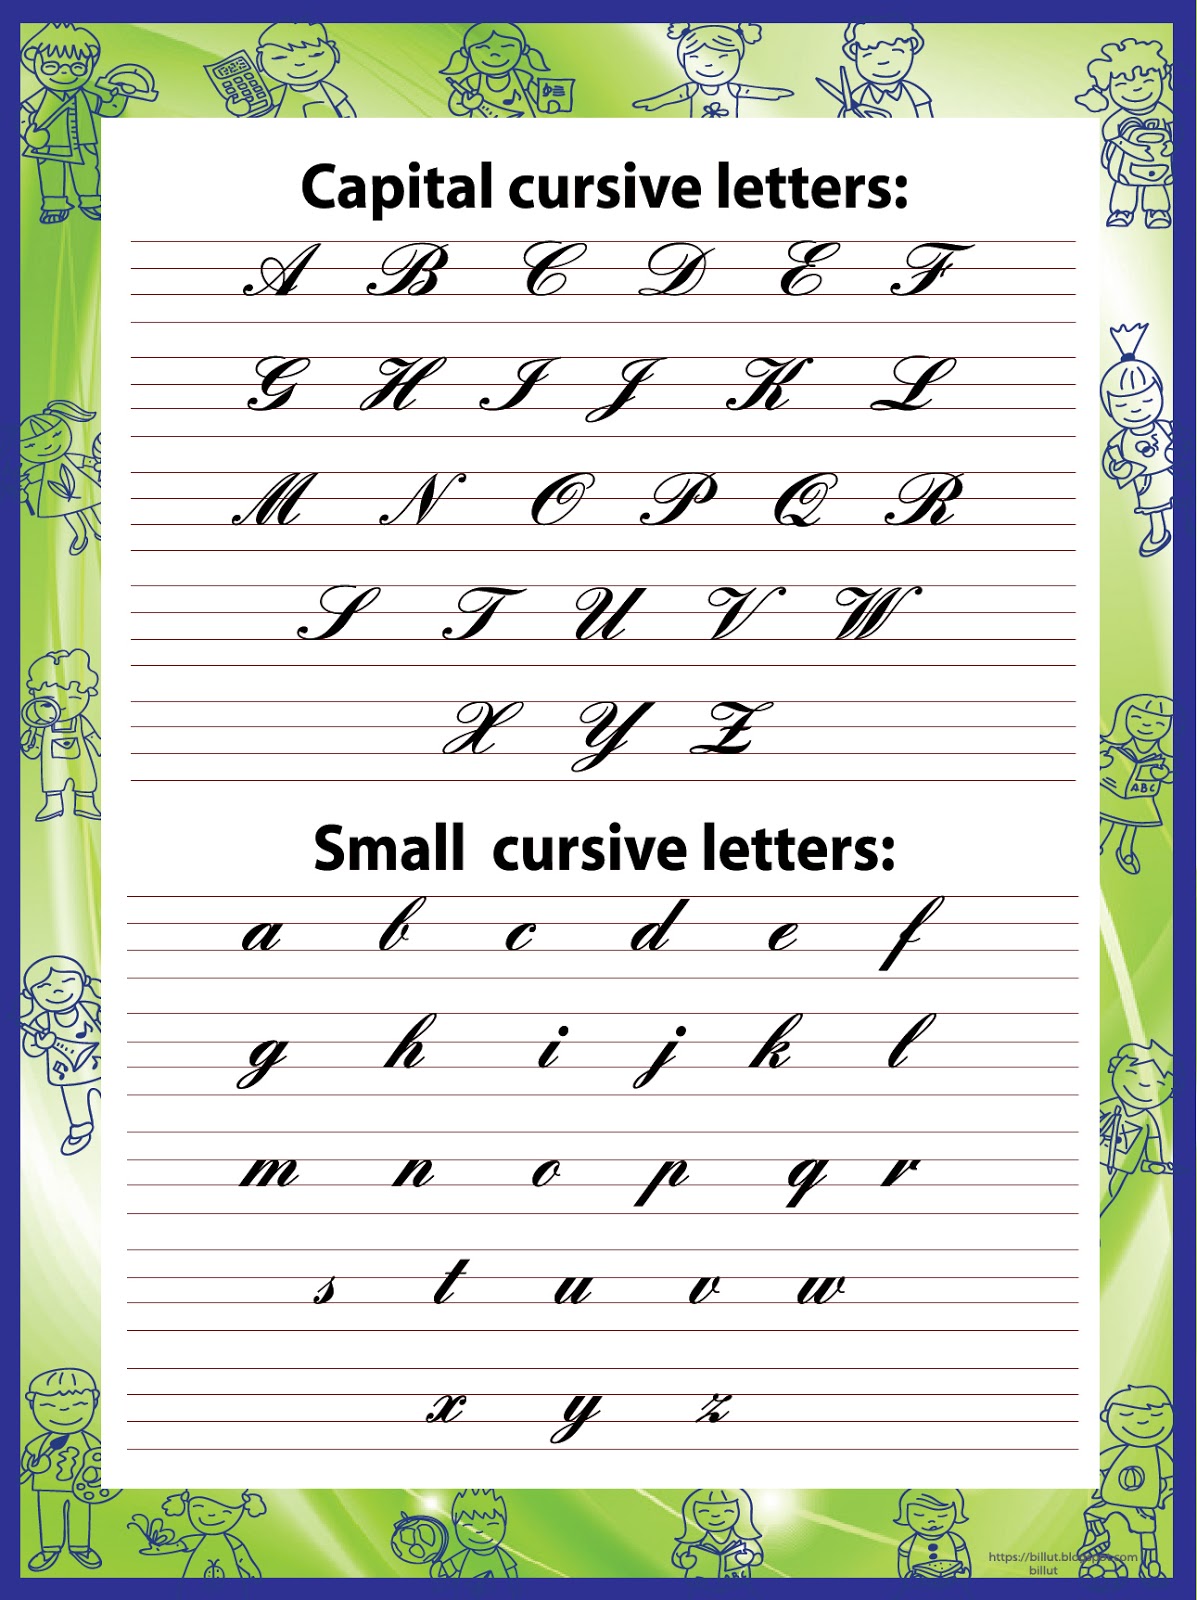 cursive writing 2 letter words